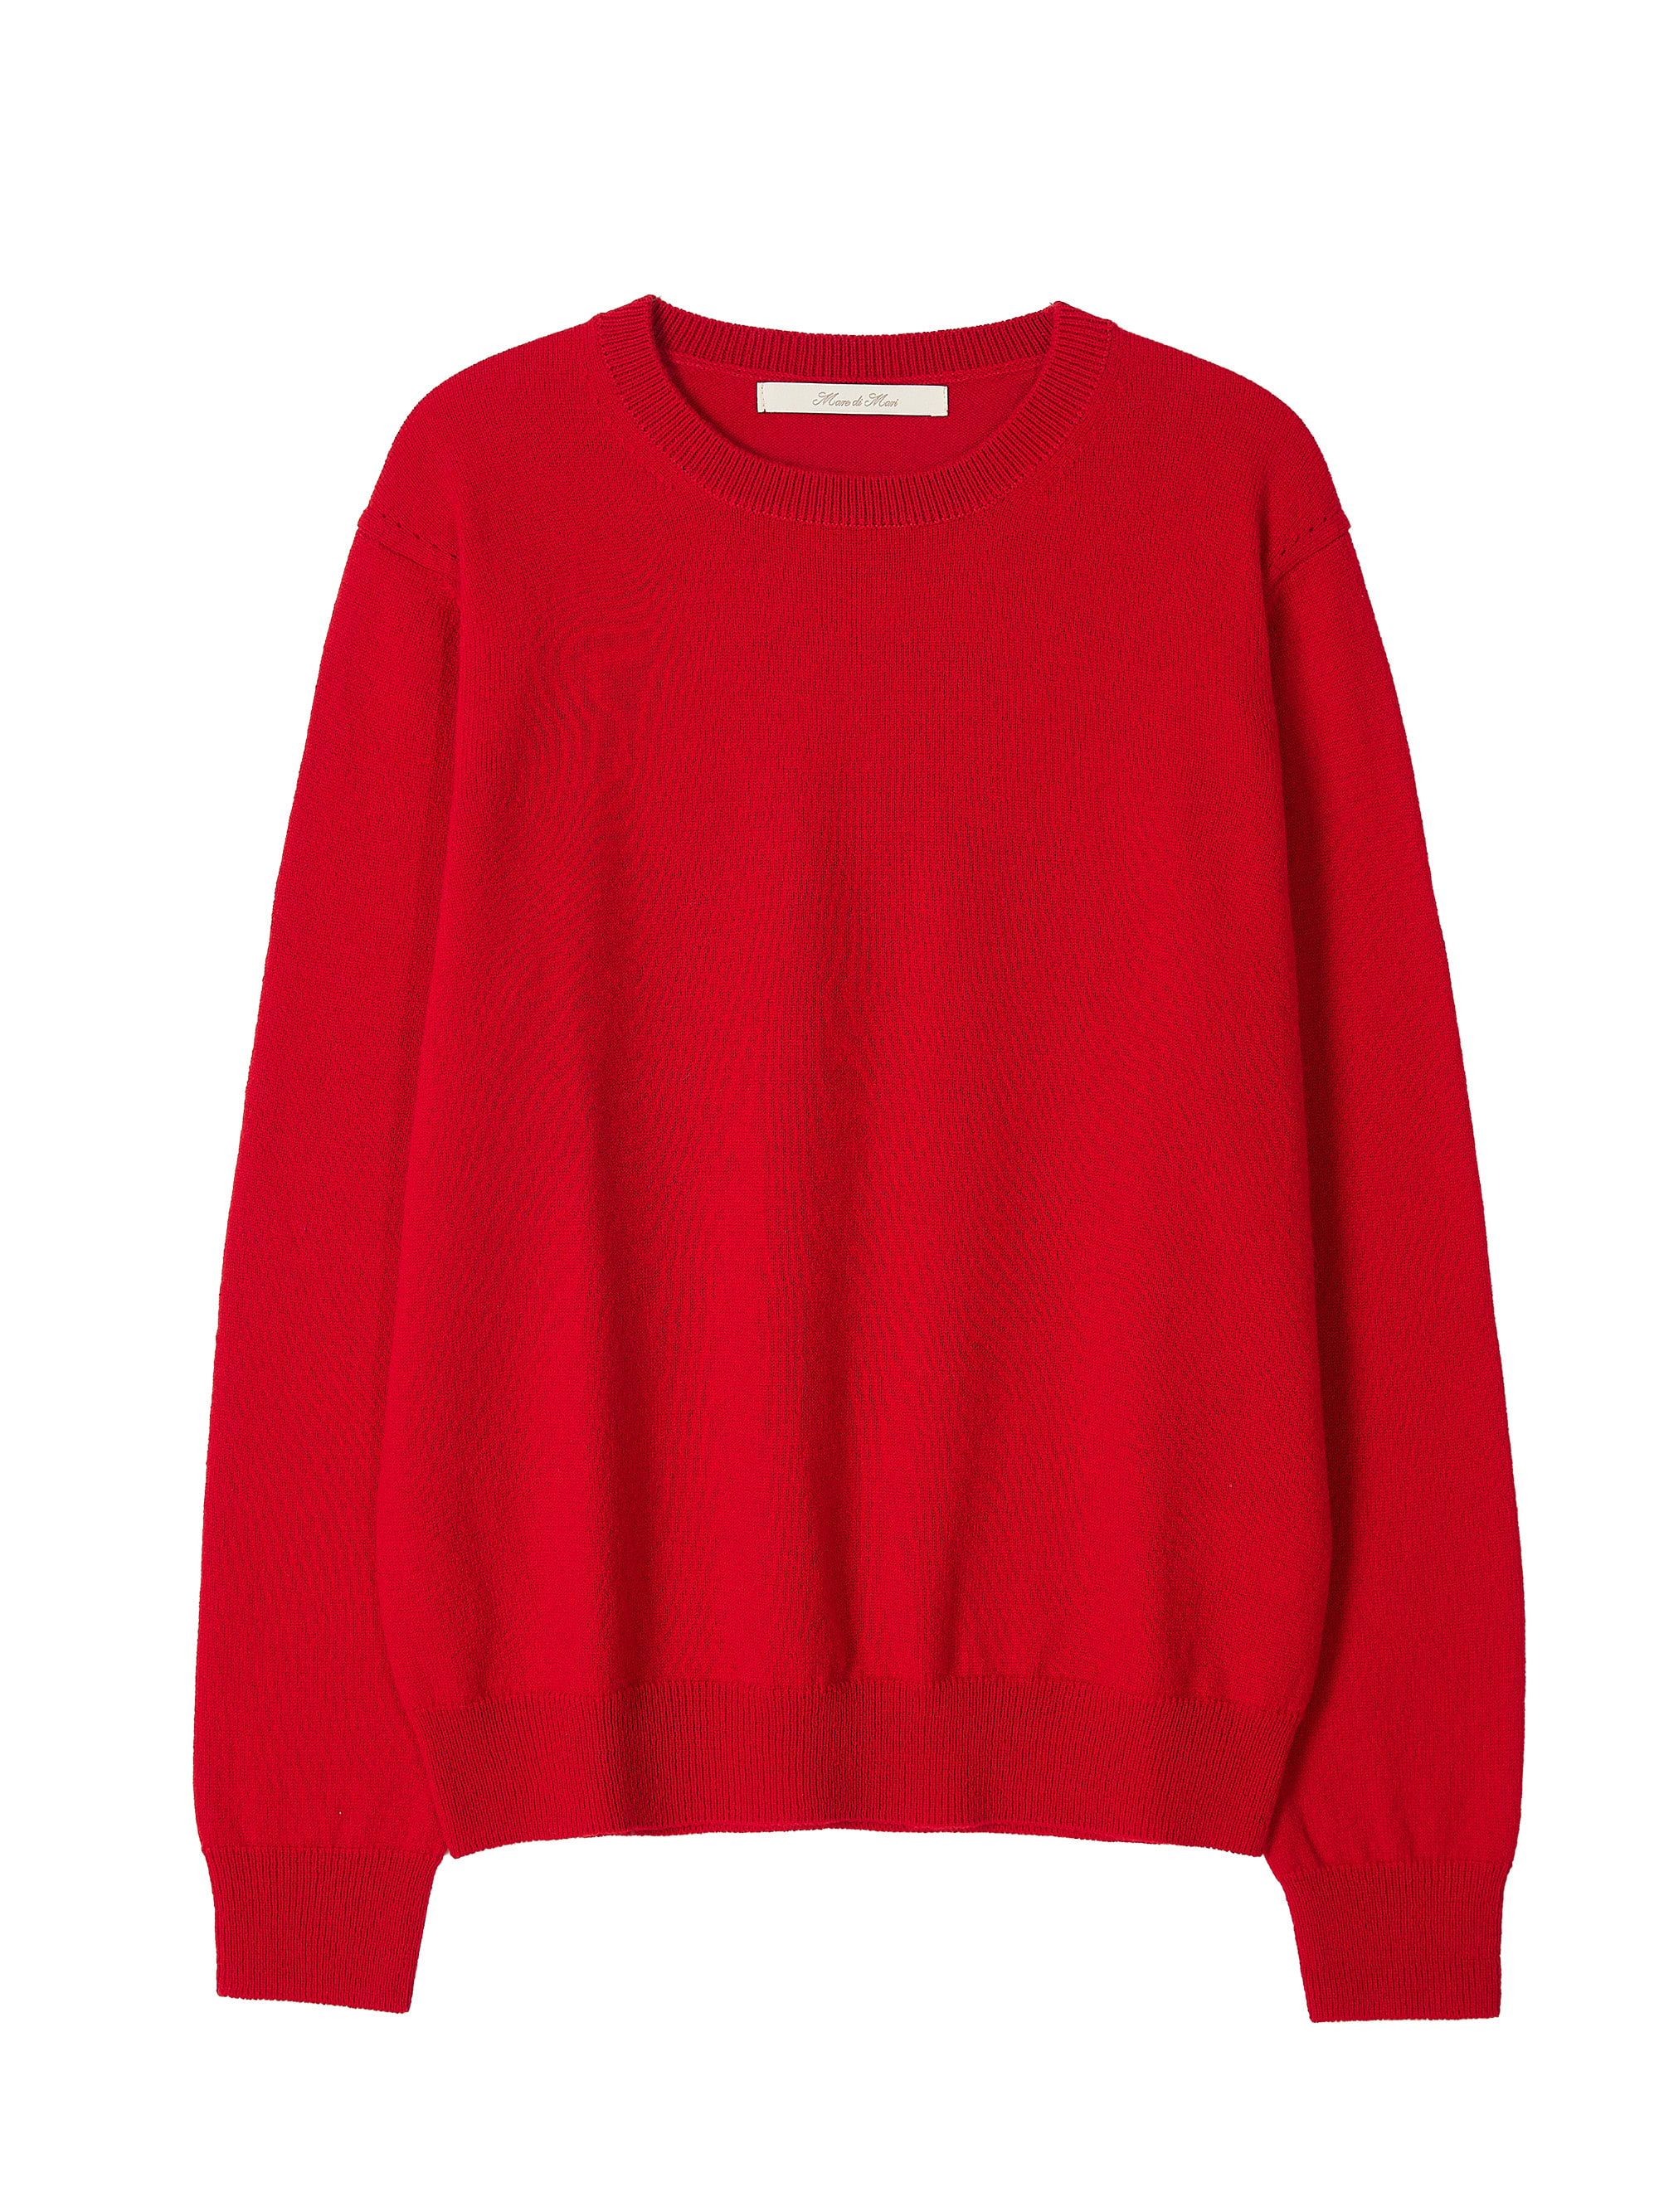 Todd&amp;Duncan Cashmere 100% Roundneck Basic Knit Top - Red